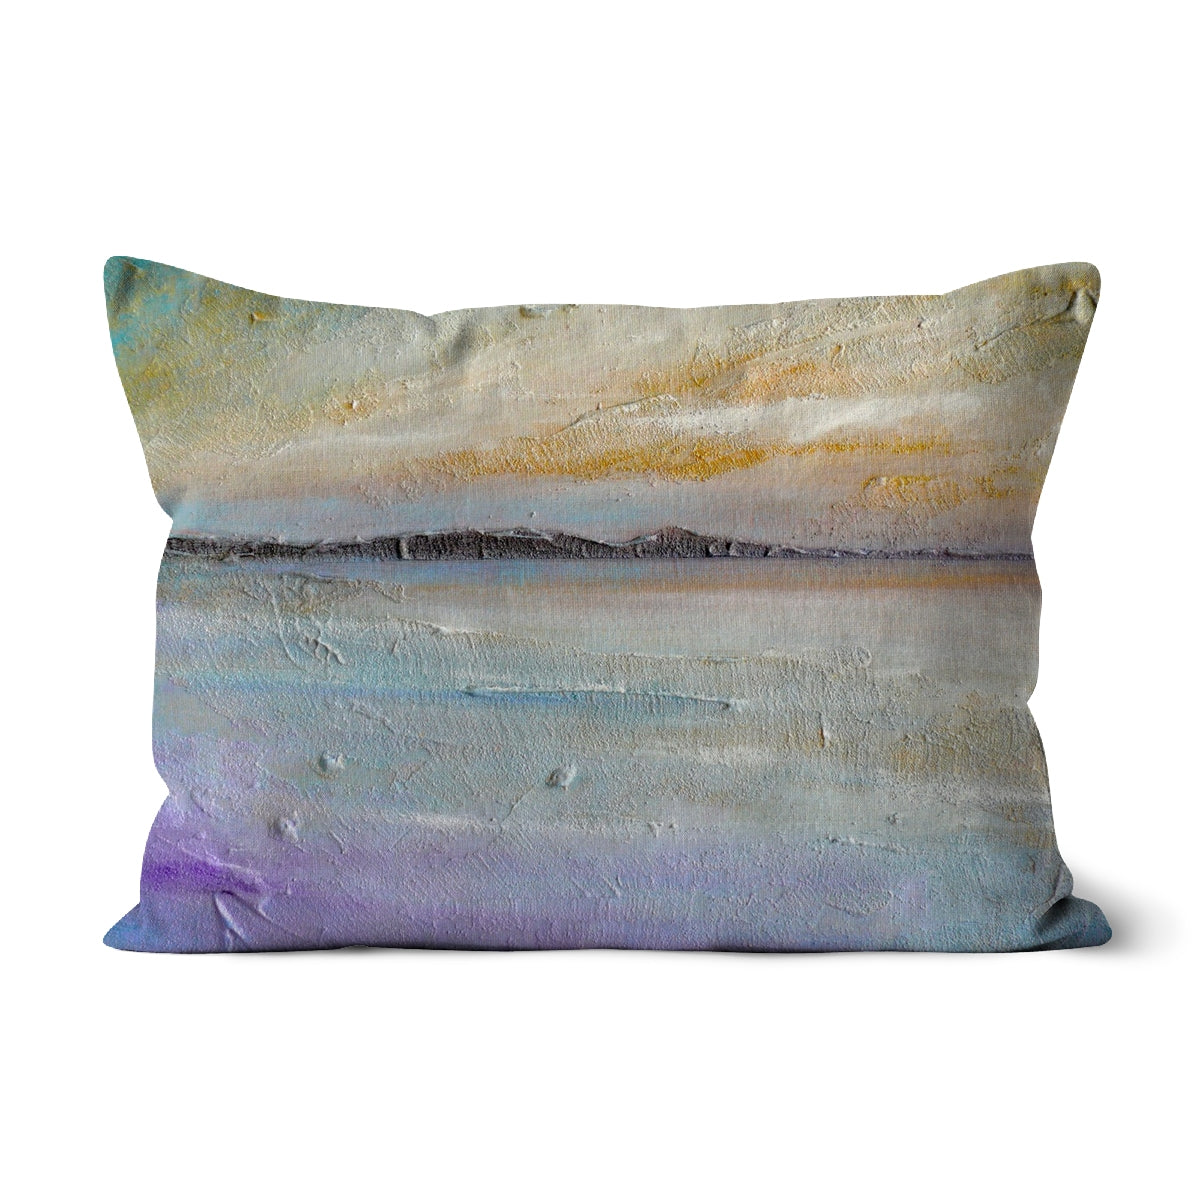 Sollas Beach South Uist Art Gifts Cushion-Cushions-Hebridean Islands Art Gallery-Linen-19"x13"-Paintings, Prints, Homeware, Art Gifts From Scotland By Scottish Artist Kevin Hunter